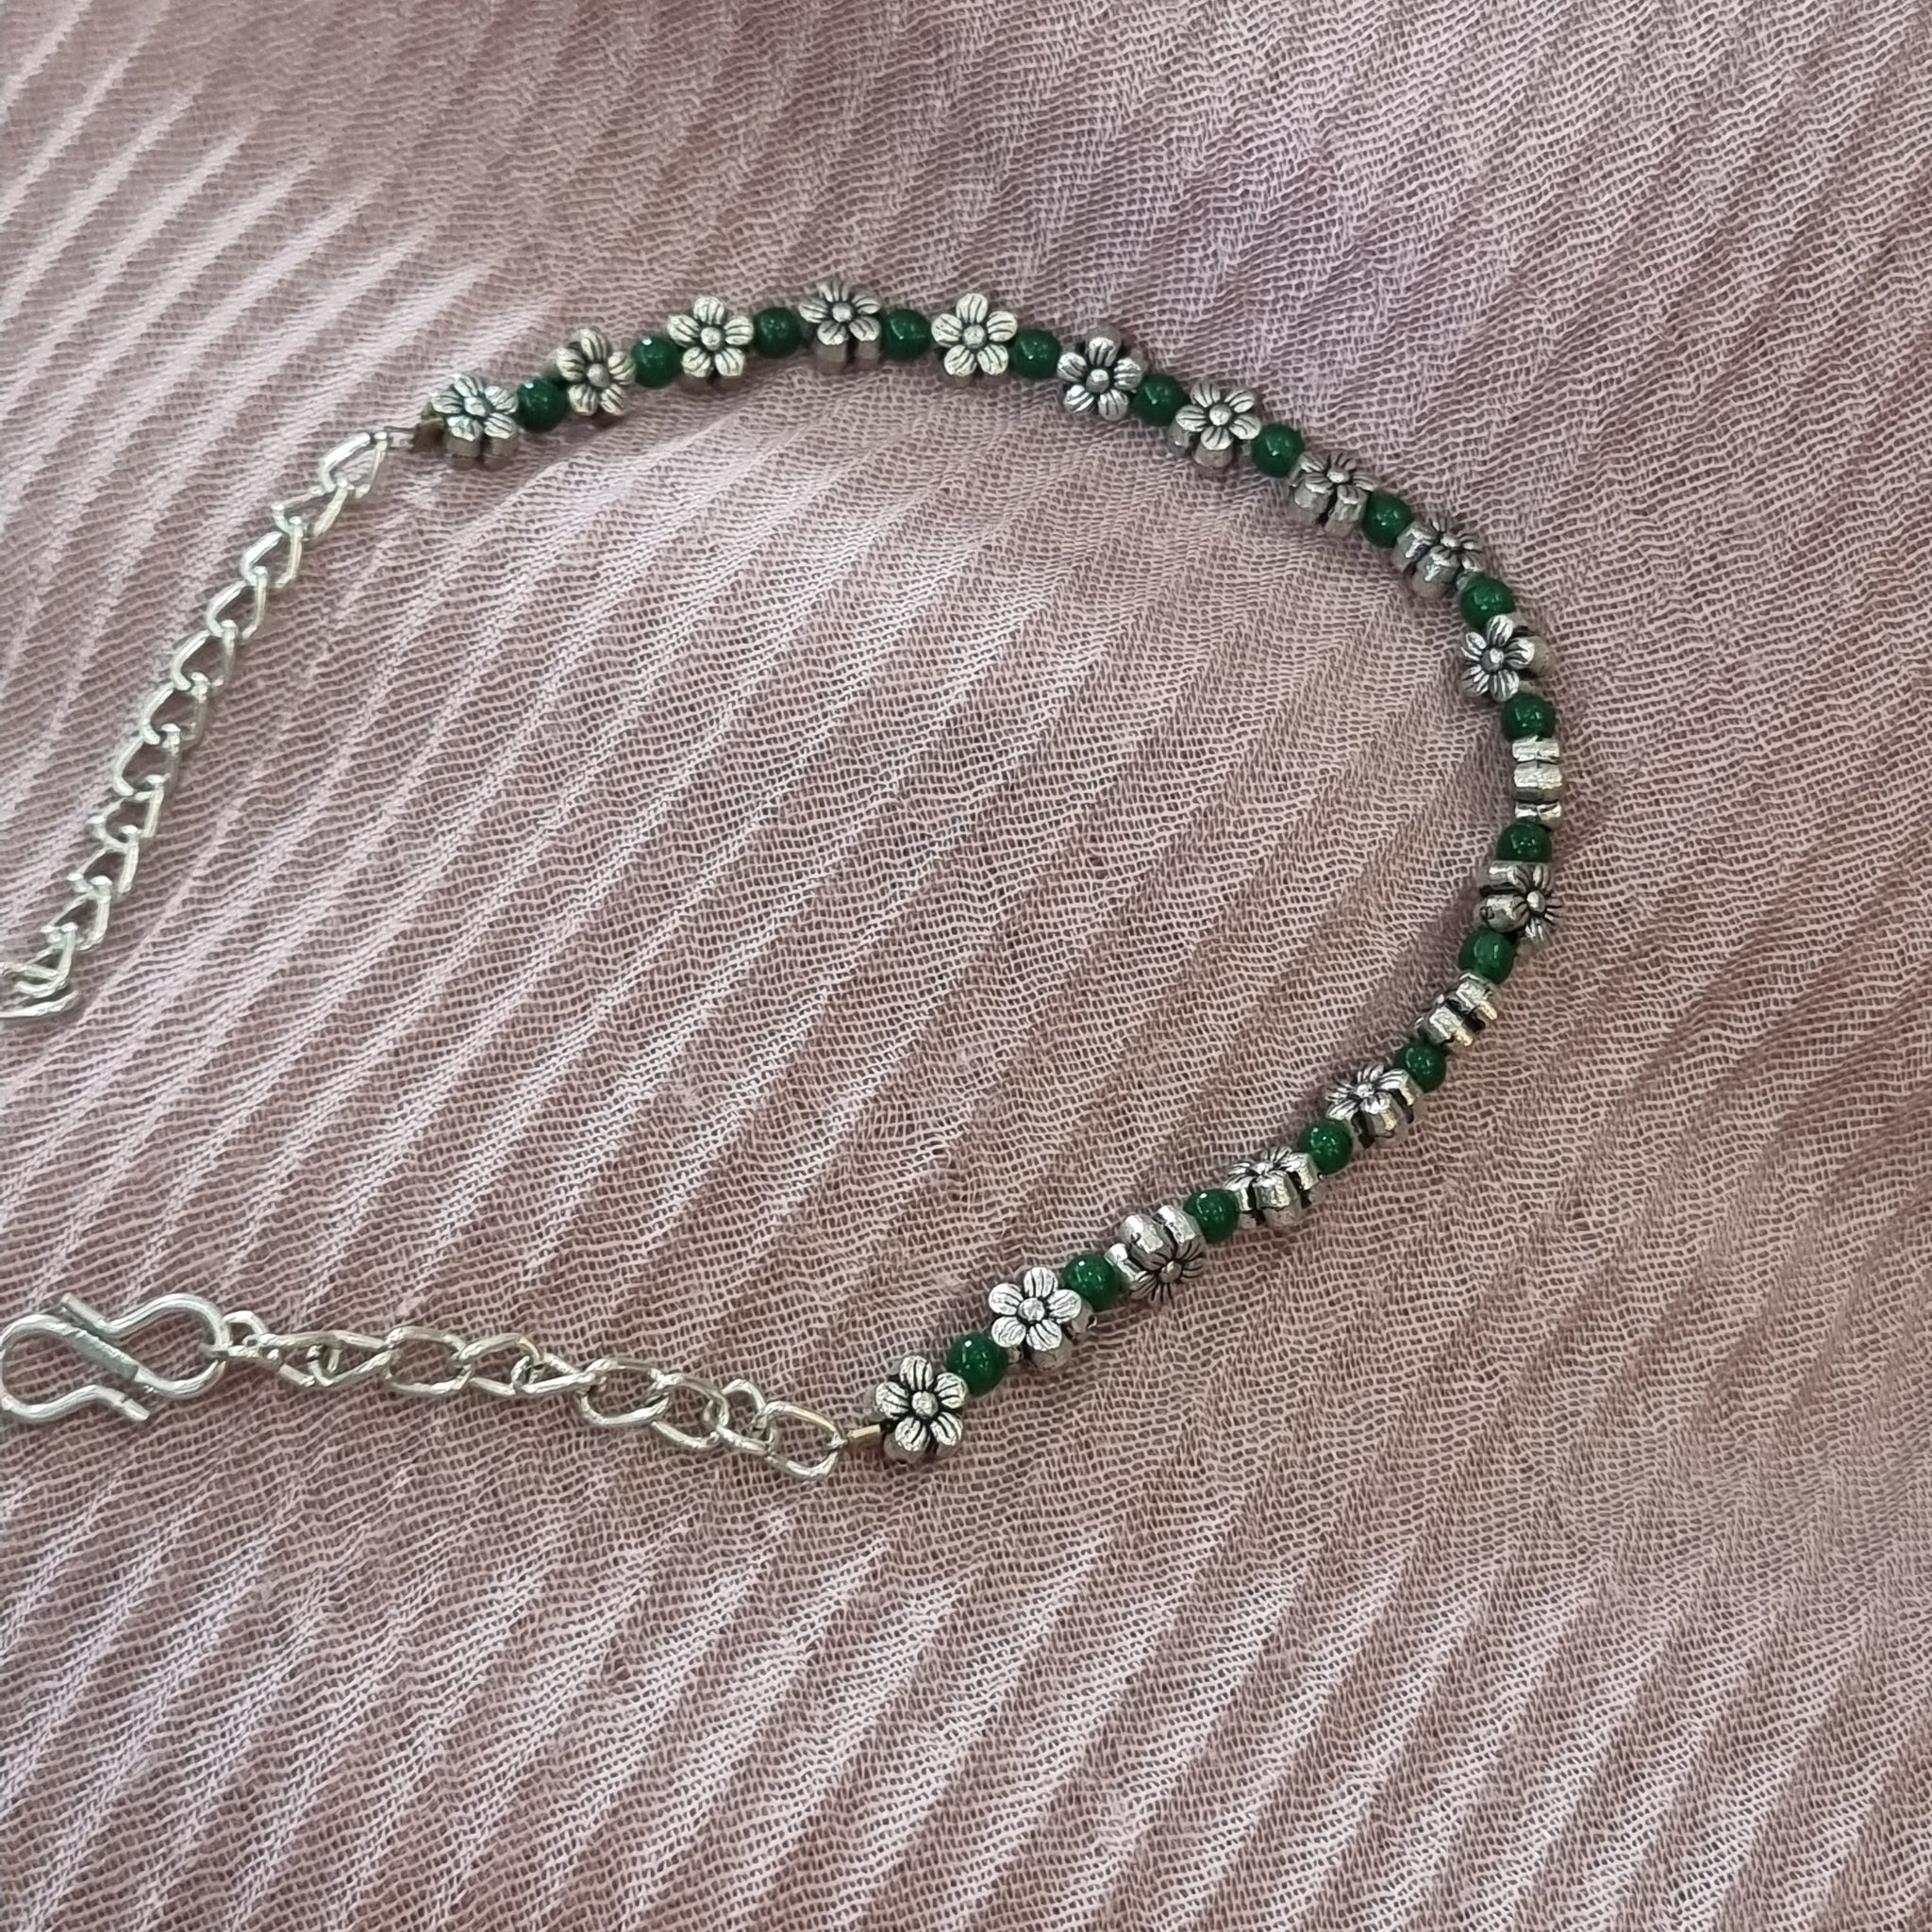 Beautiful designer green beads anklets for kids or young girls